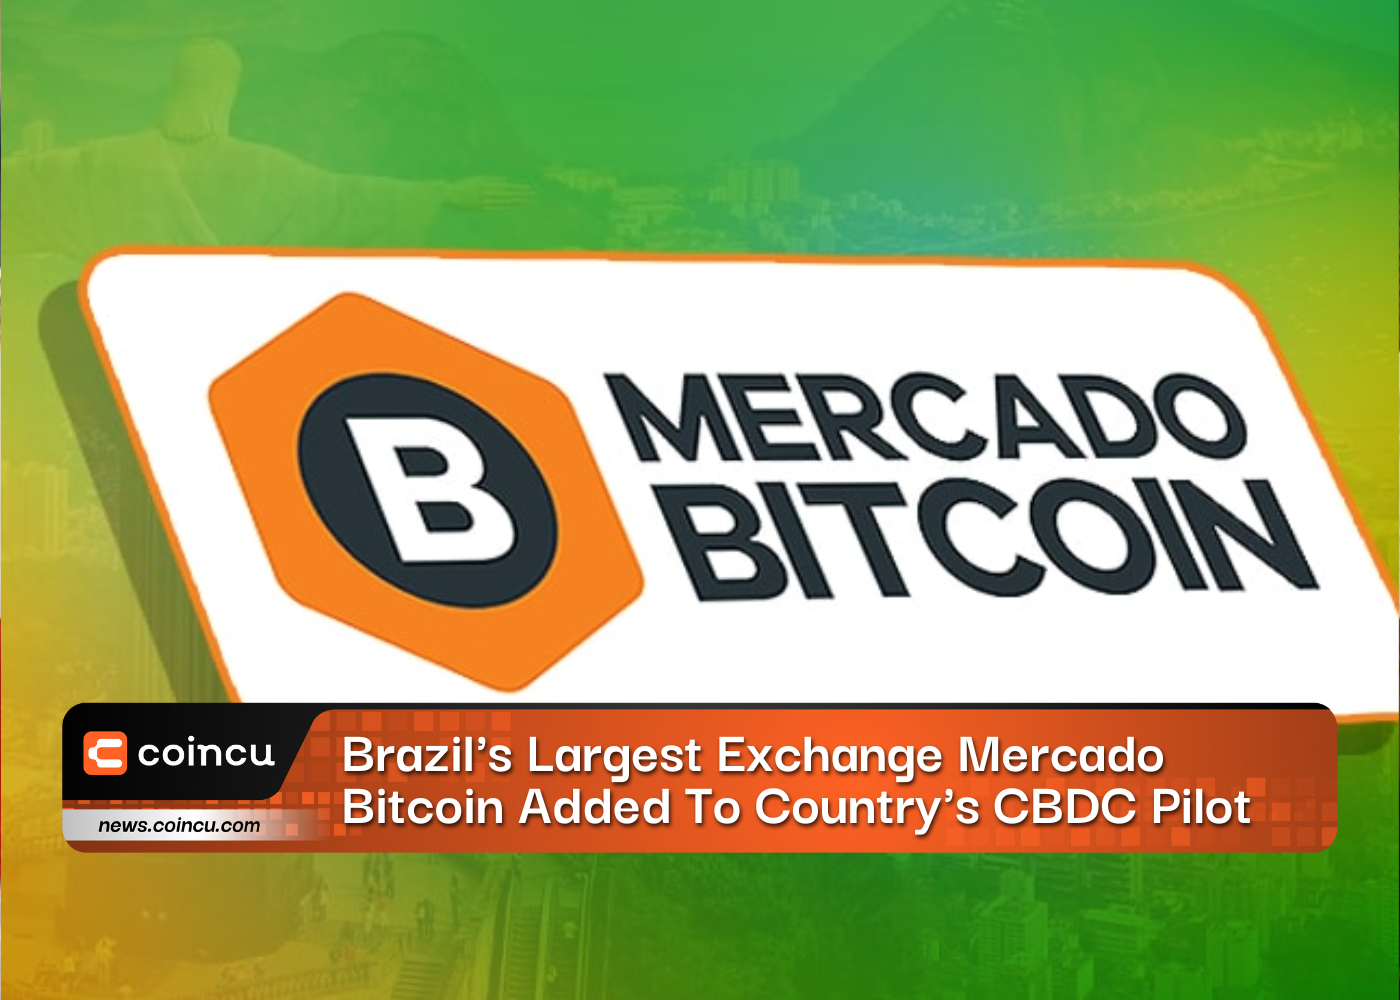 Brazil's Largest Exchange Mercado Bitcoin Added To Country's CBDC Pilot